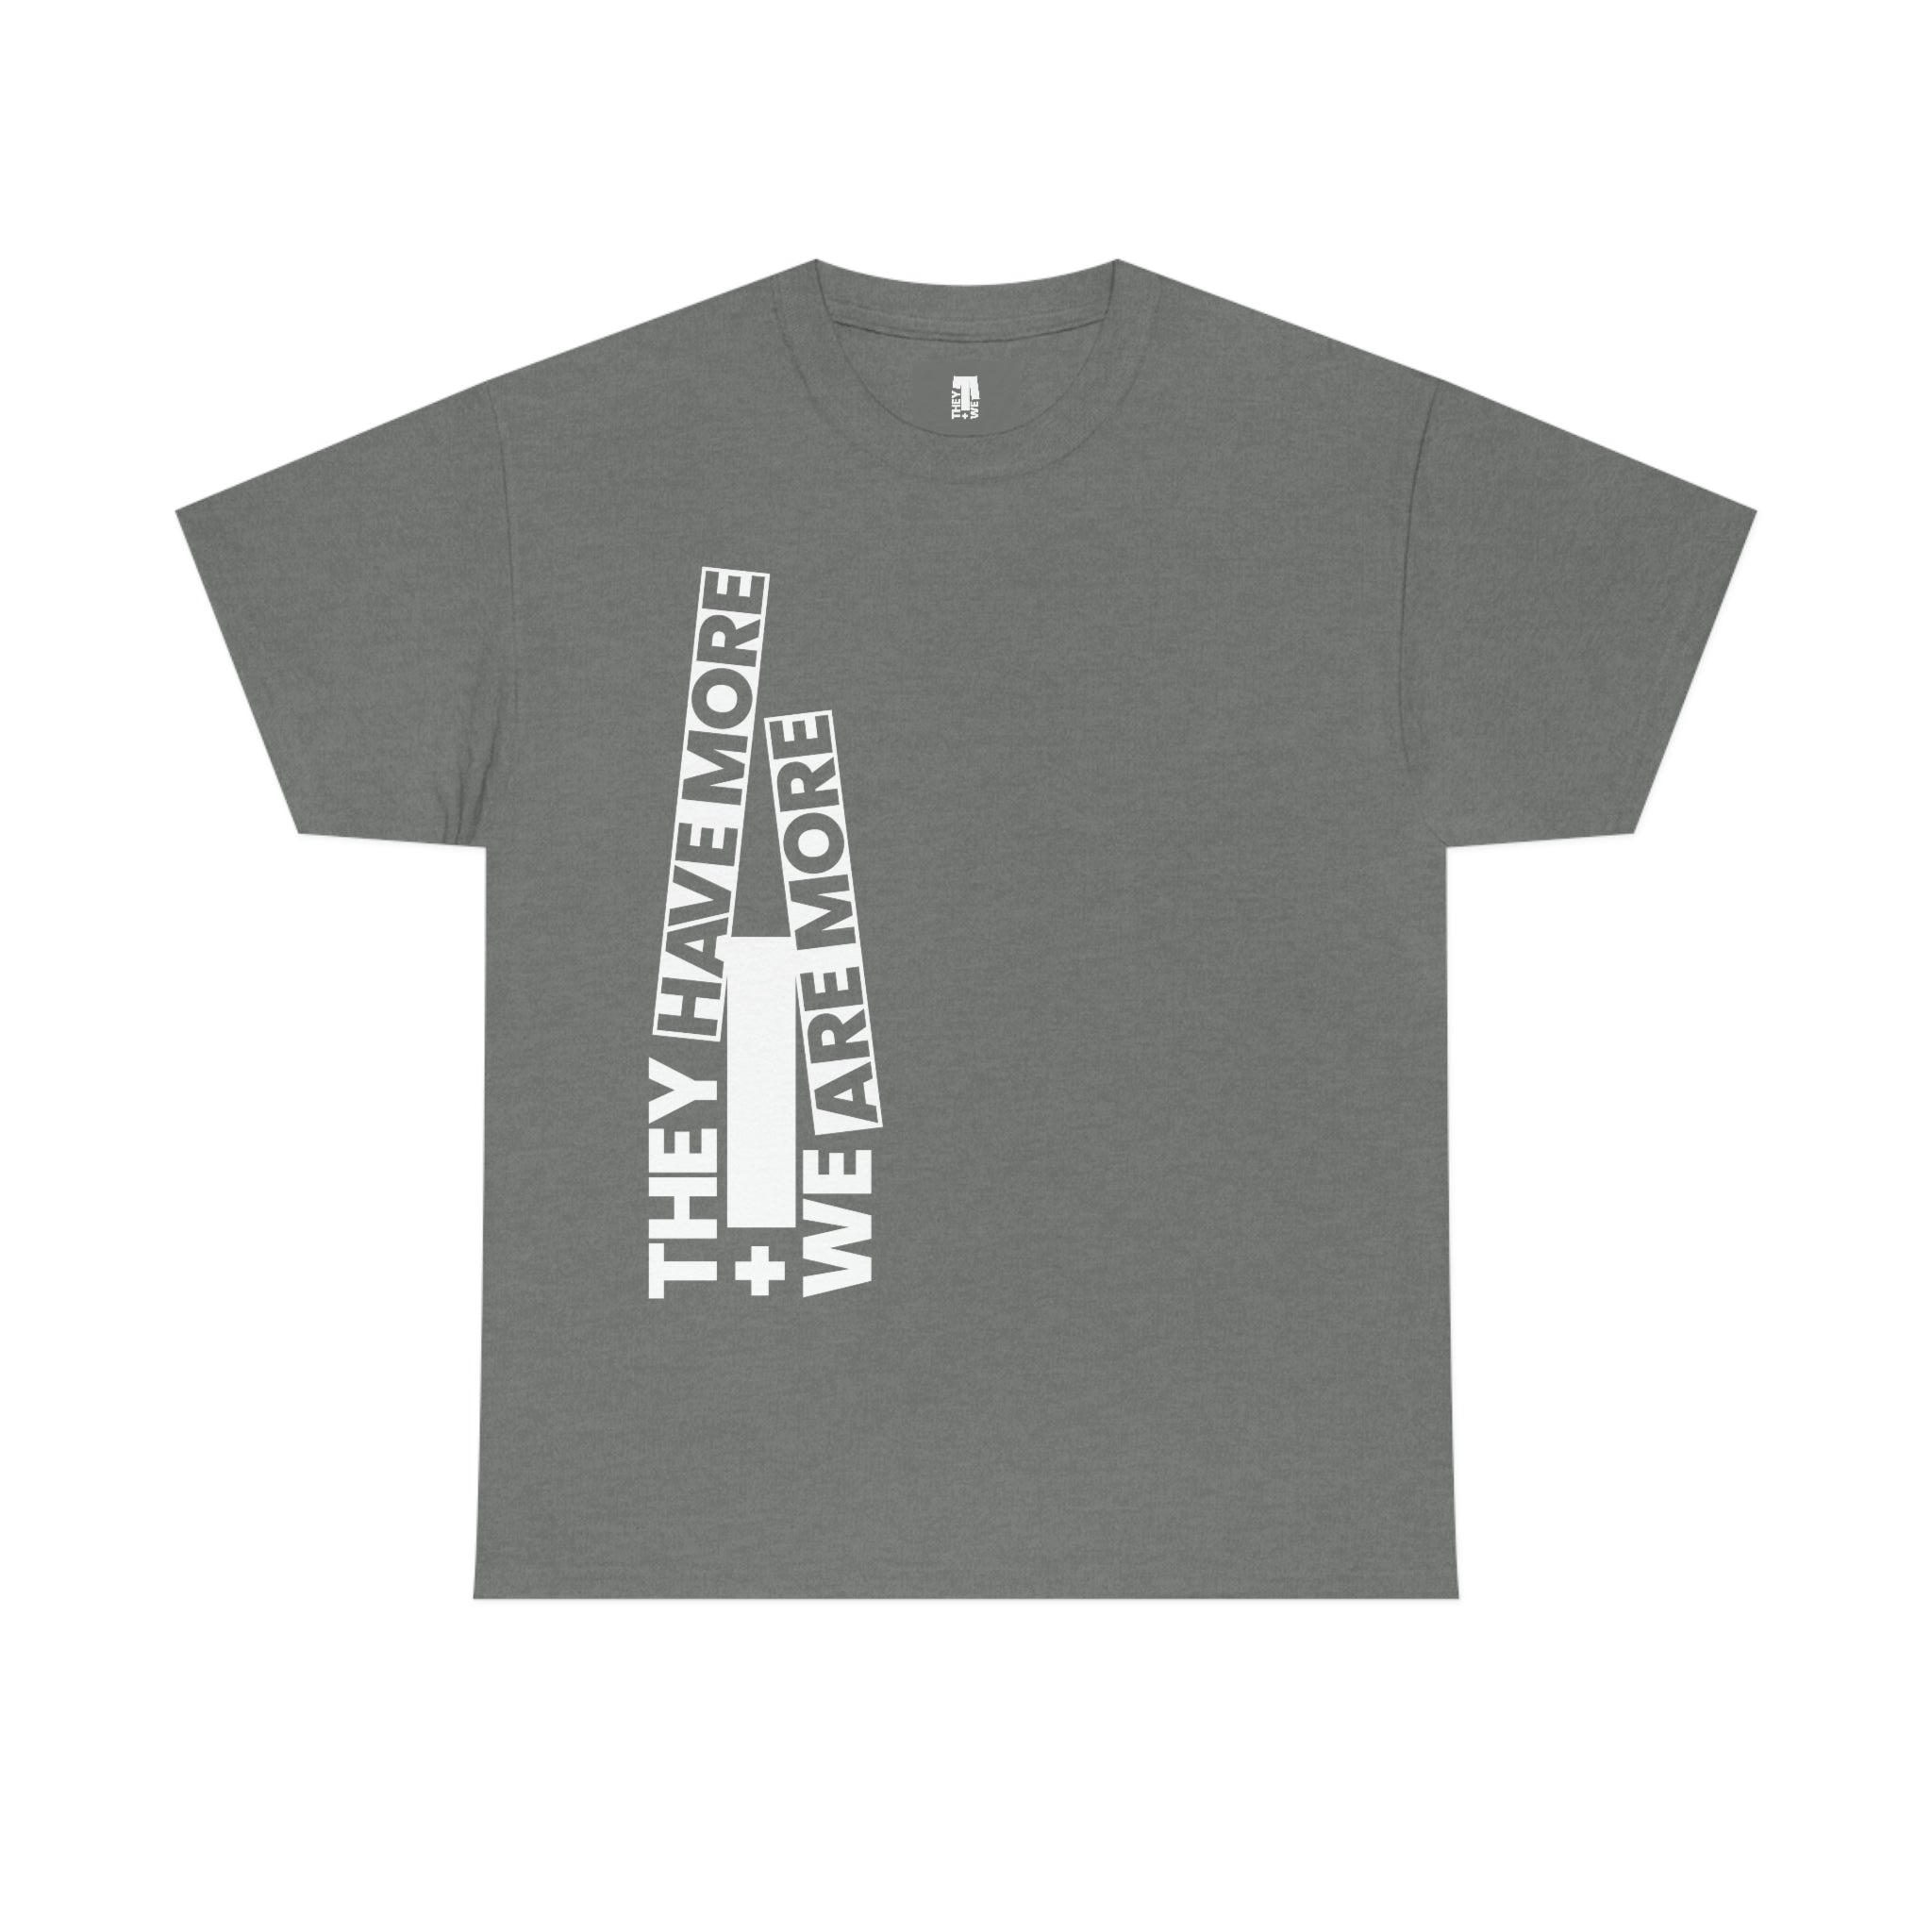 They Have More and We Are More Heavy T-Shirt - Grey